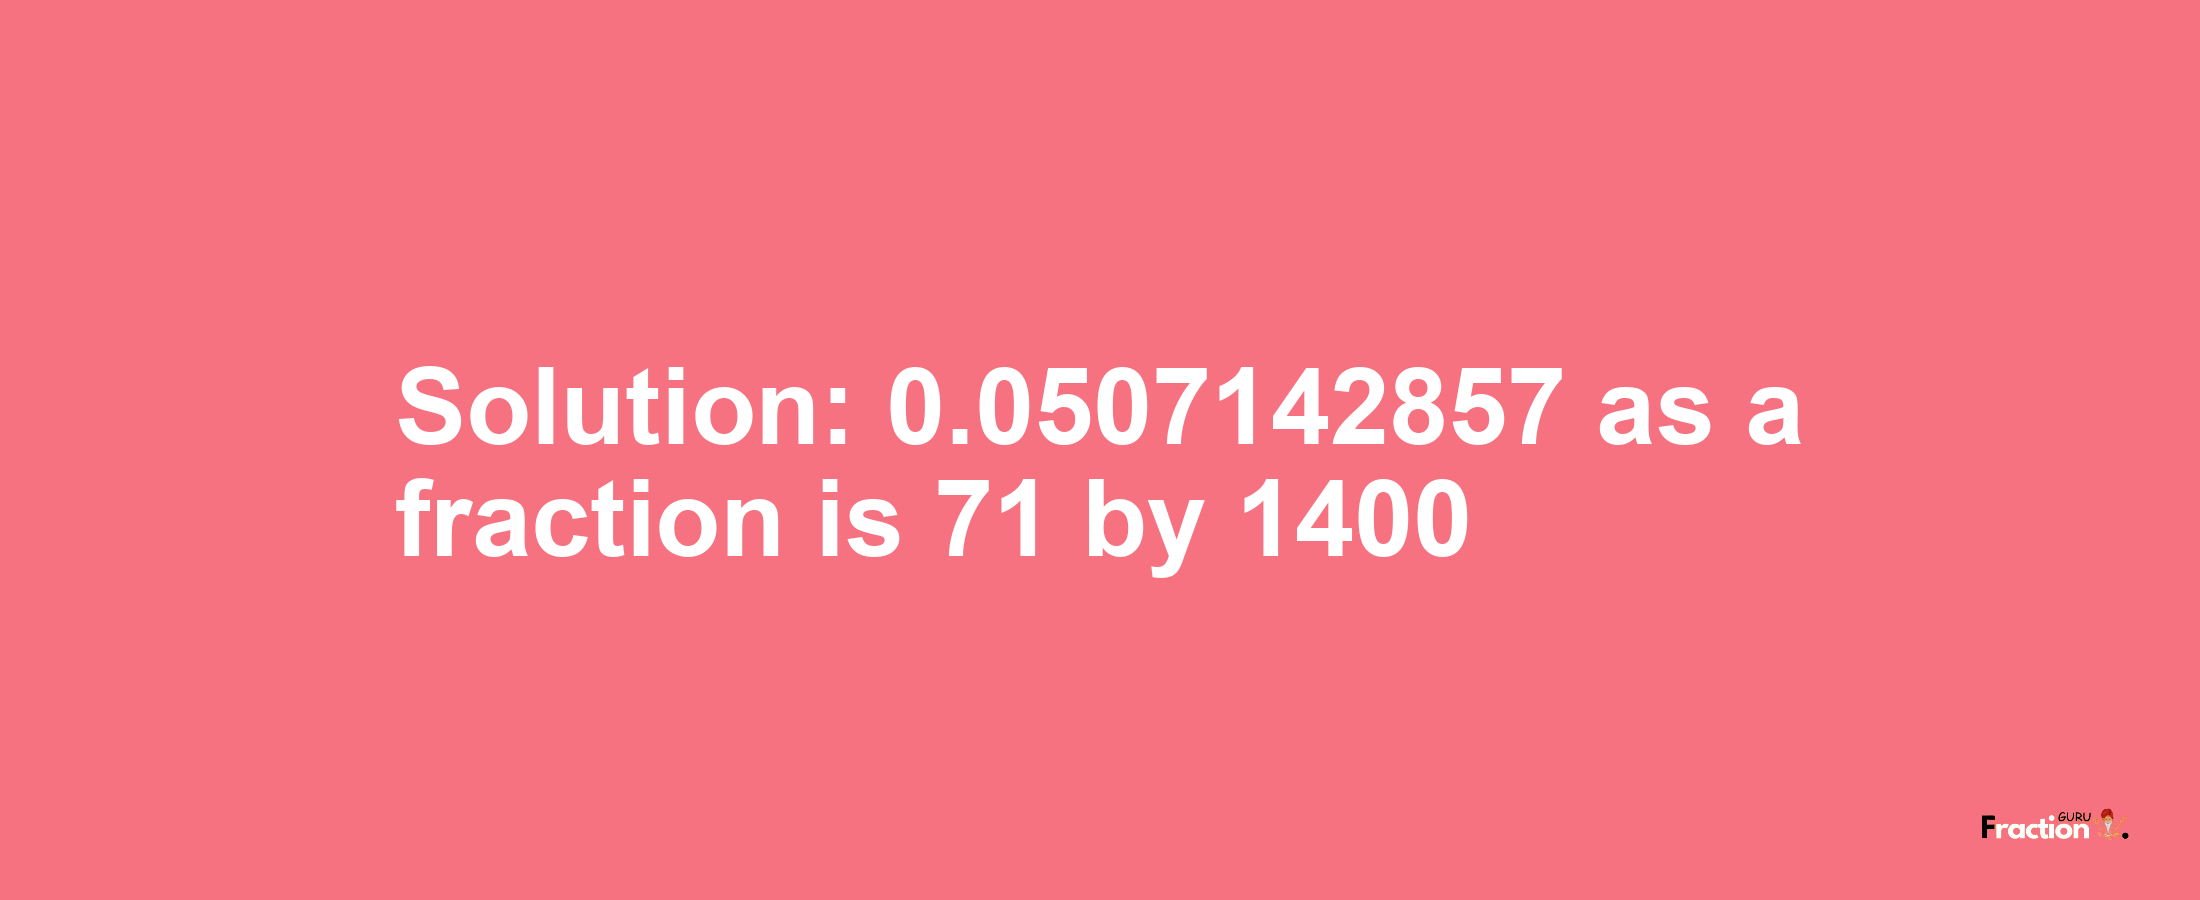 Solution:0.0507142857 as a fraction is 71/1400